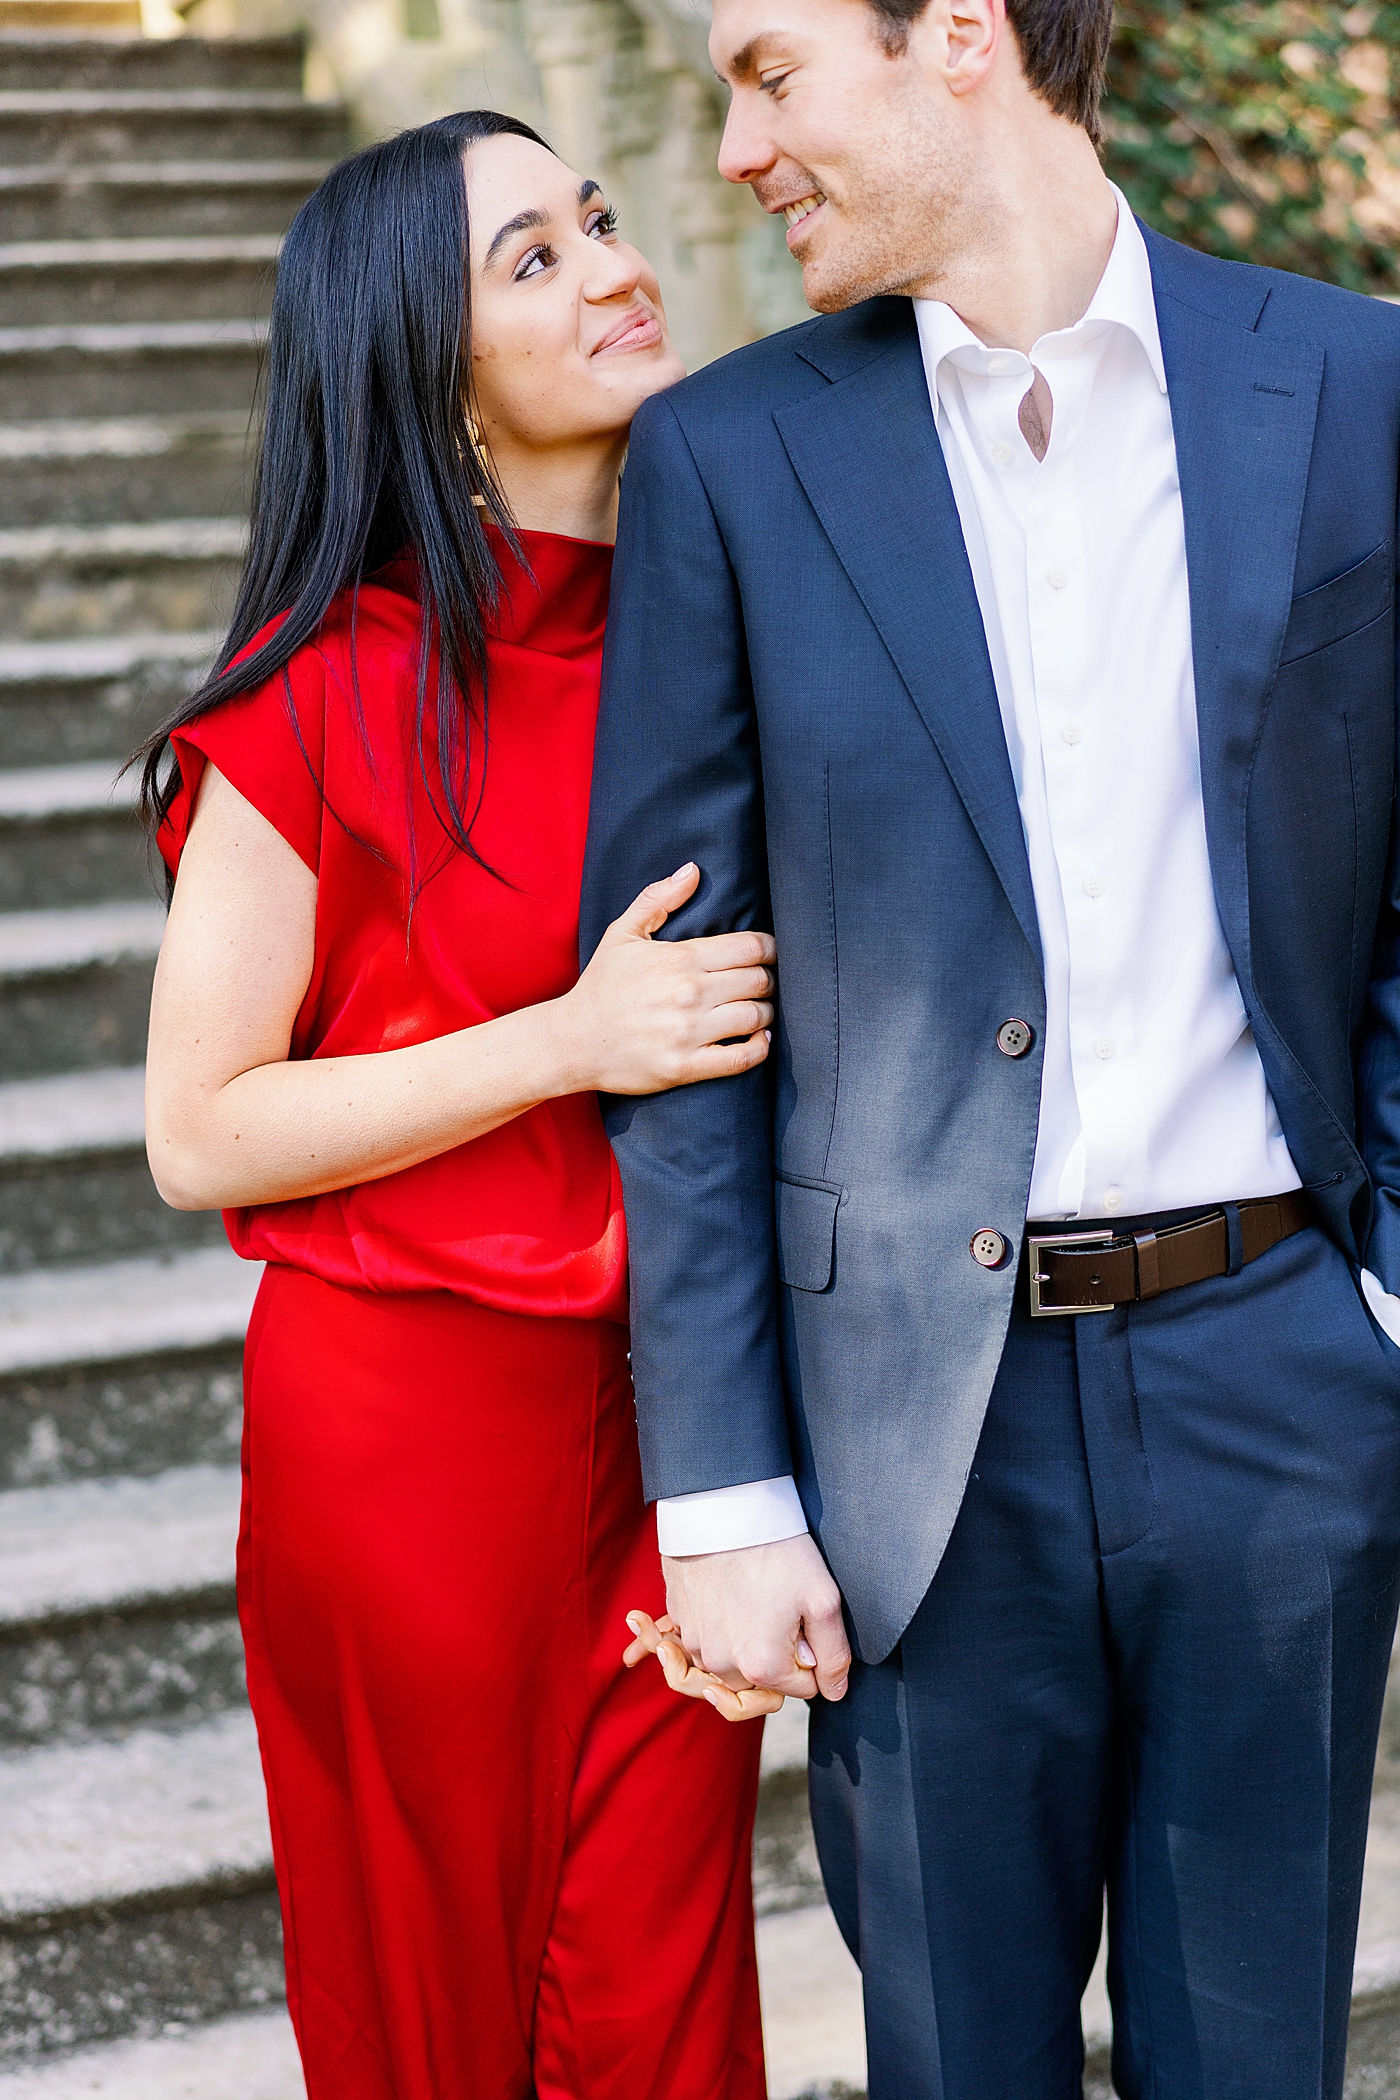 Couple in red and blue holding hands at the park | Image by Annie Laura Photo